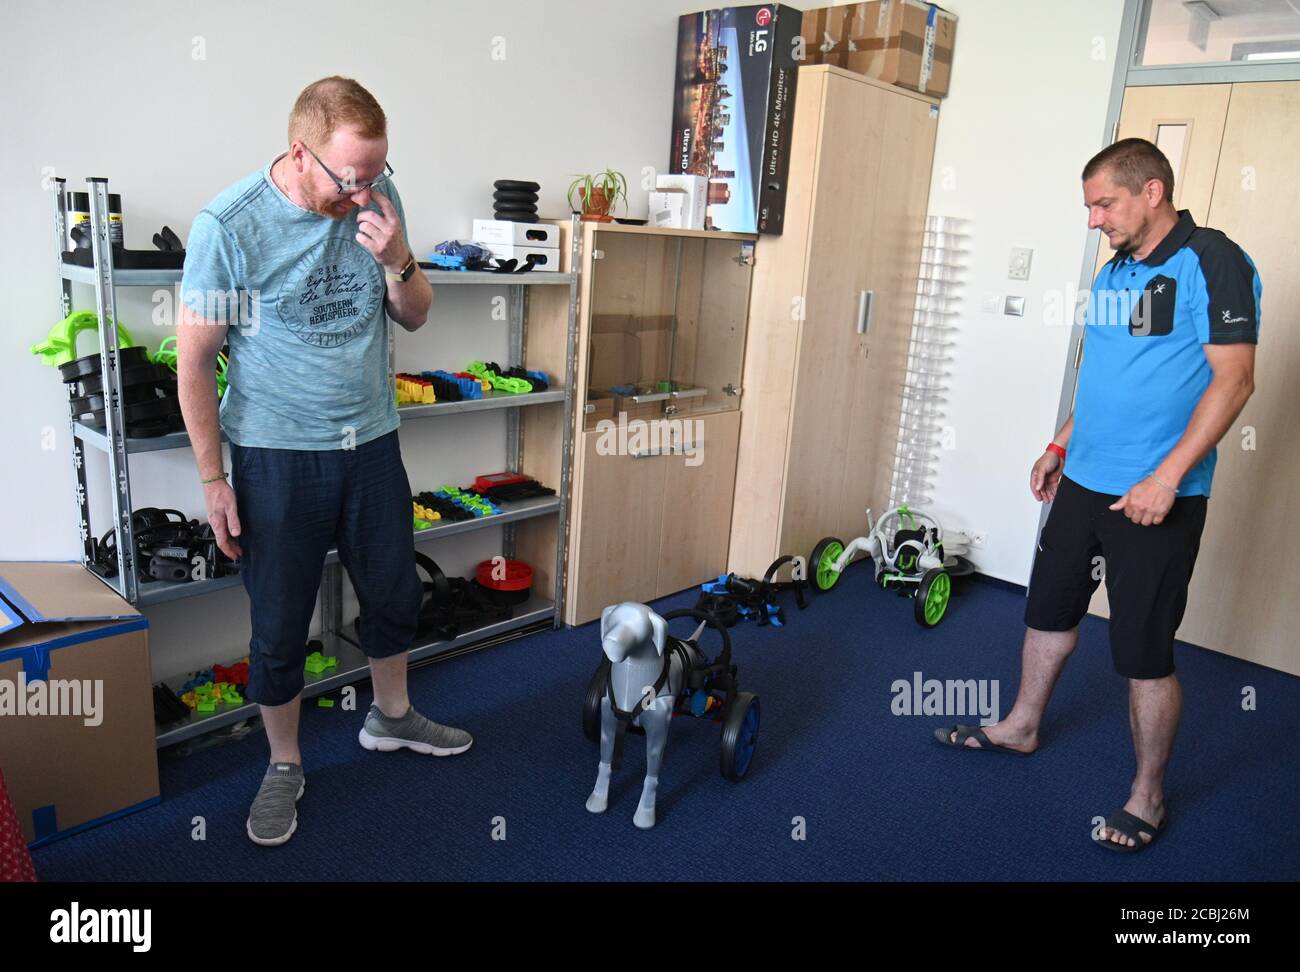 Brno, Czech Republic. 11th Aug, 2020. AnyOneGo, Czech company from Brno, manufactures prosthetics and wheelchairs for animals, most parts prints on 3D printers. On the photo co-founders of the company L-R Ivan Lukas and Martin Schenk show a wheelchair for a dog, on August 11, 2020, in Brno, Czech Republic. (CTK photo/Igor Zehl) Stock Photo